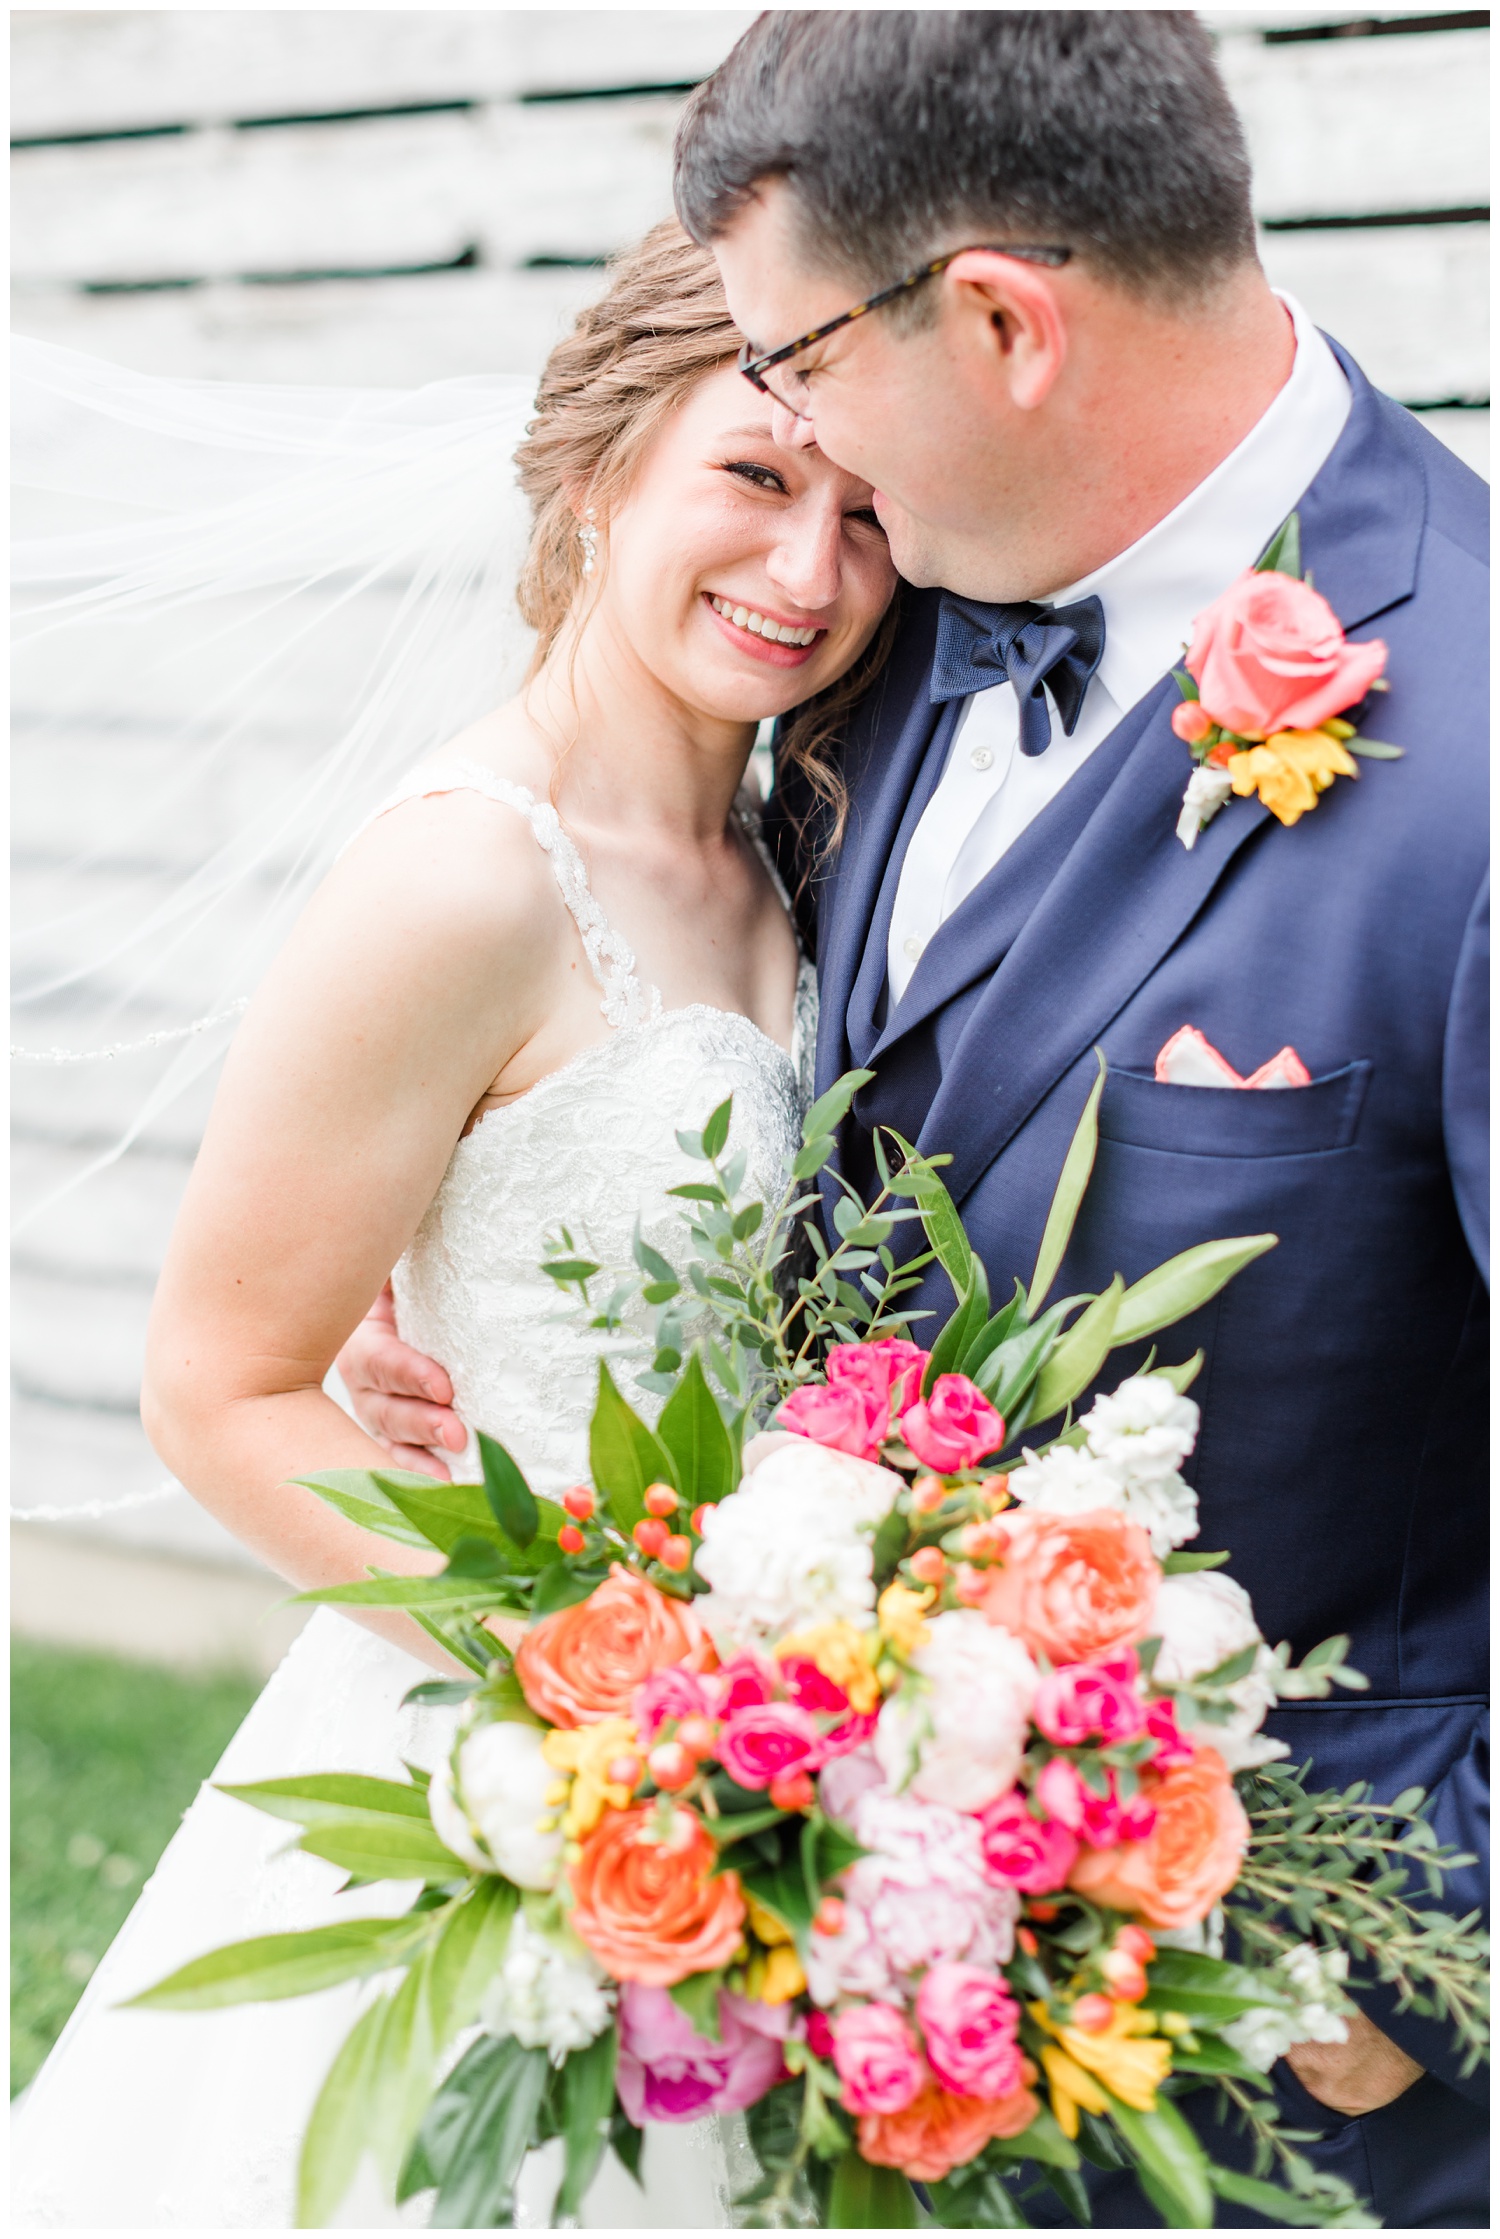 Leslie embraces her groom as they stroll through her grandparents farm | CB Studio